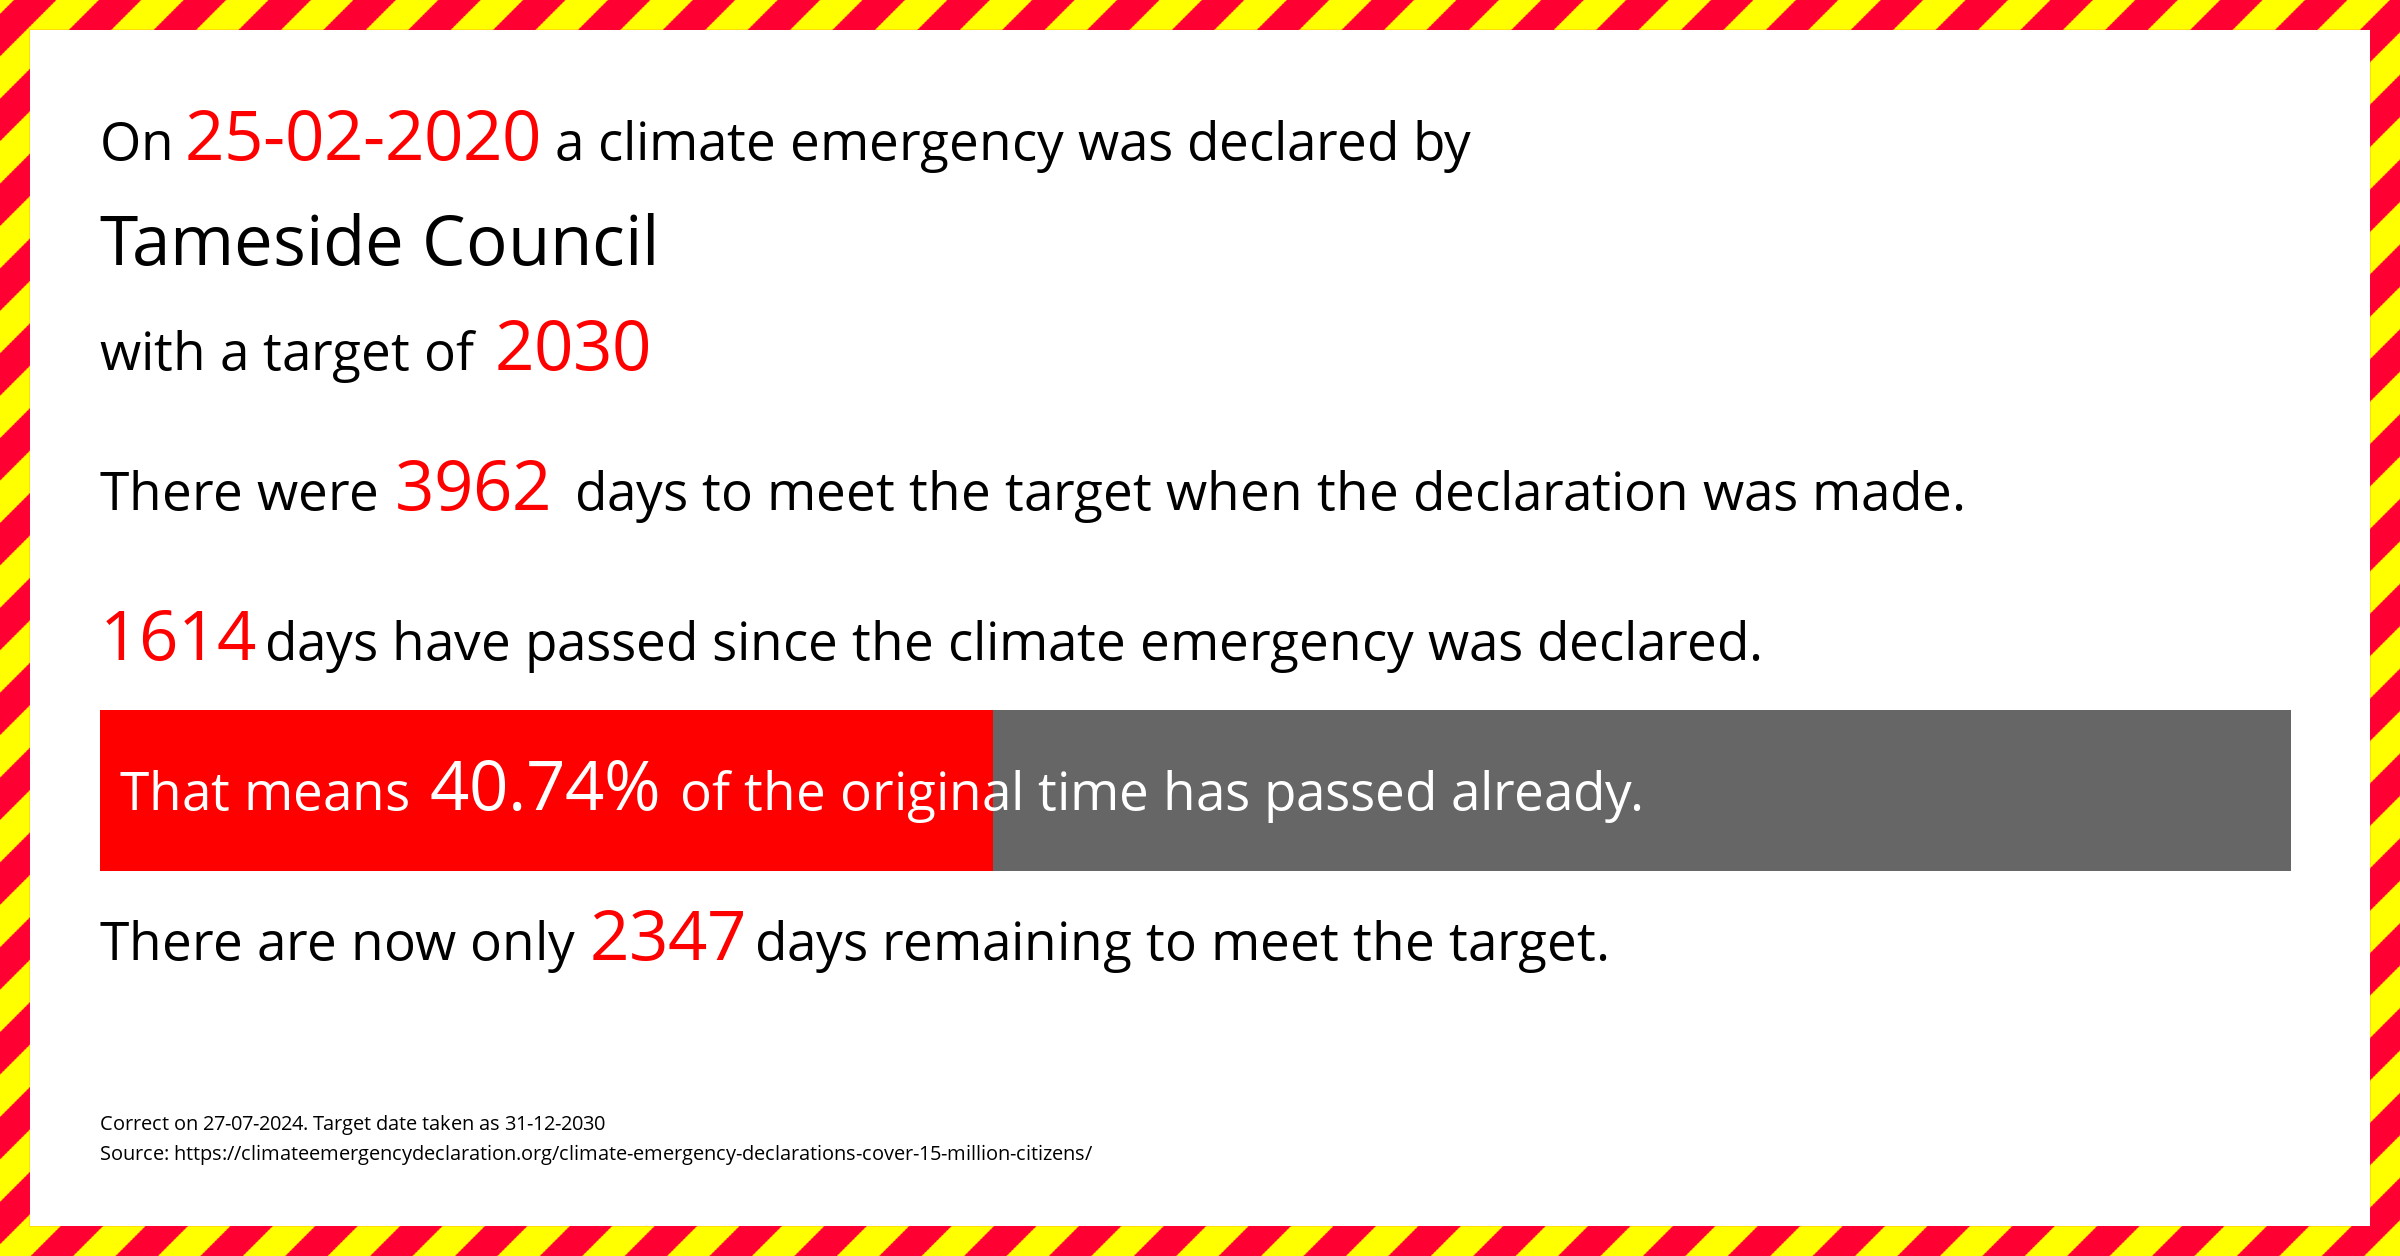 Tameside Council declared a Climate emergency on Tuesday 25th February 2020, with a target of 2030.